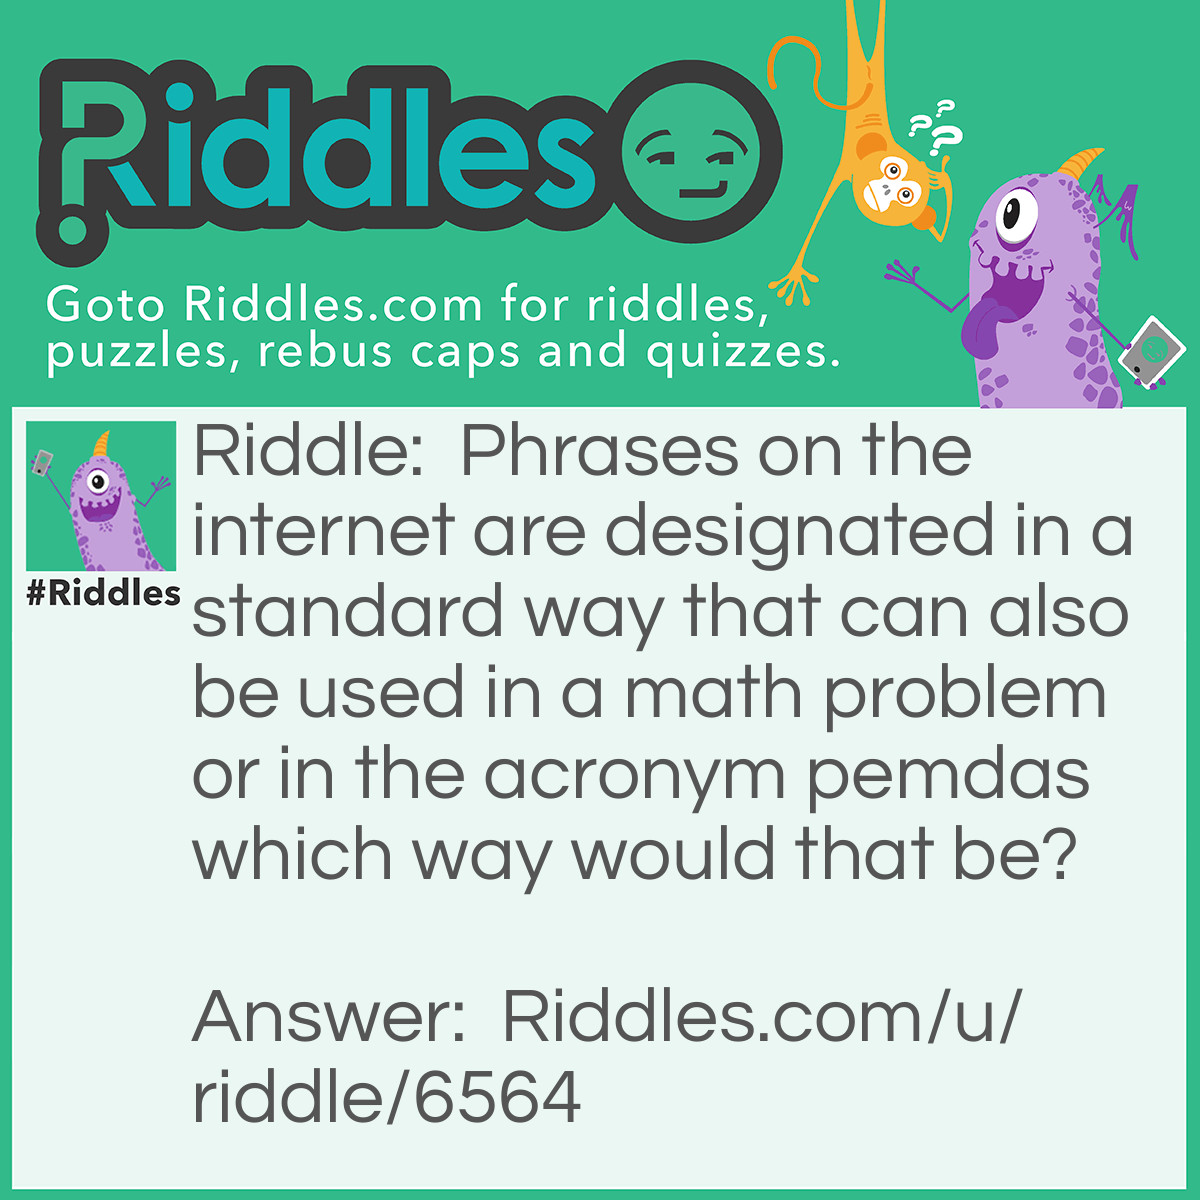 Riddle: Phrases on the internet are designated in a standard way that can also be used in a math problem or in the acronym pemdas which way would that be? Answer: parenthesis